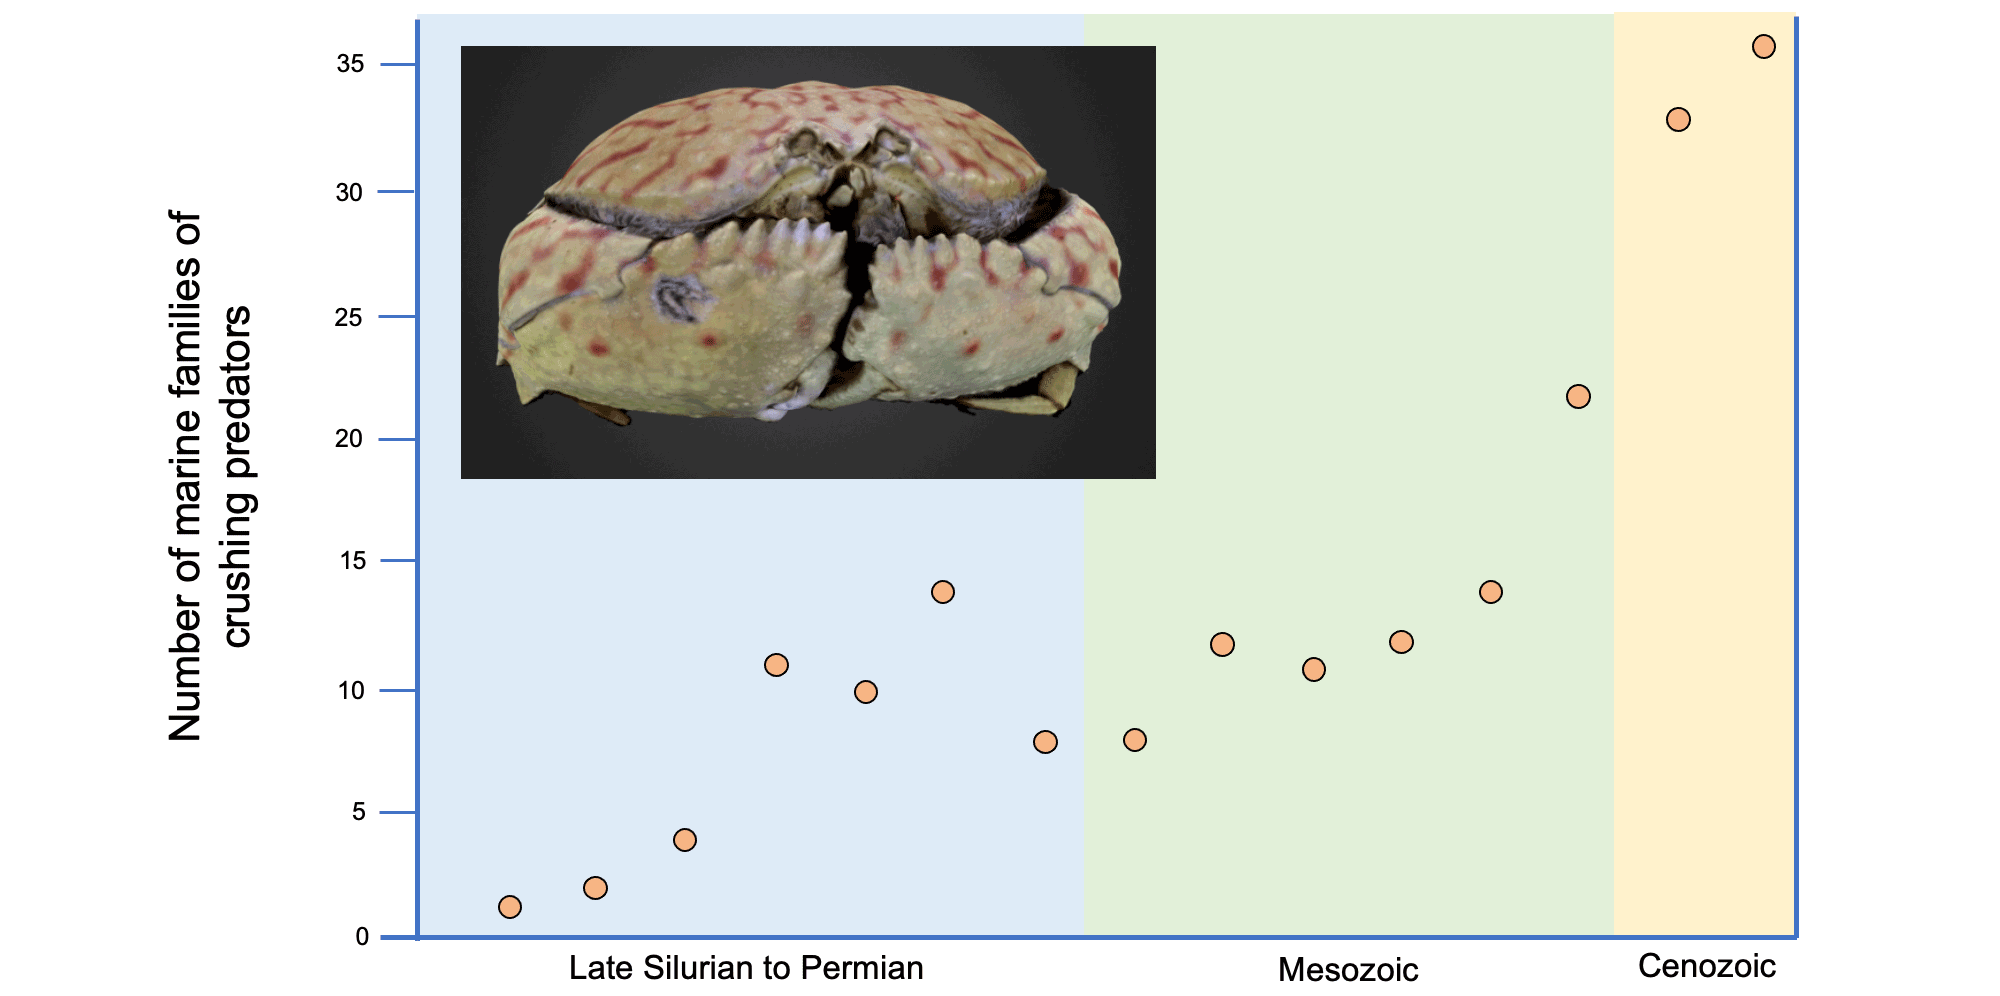 Diagram showing the increase in the number of marine families of crushing predators from the late Silurian to the present.